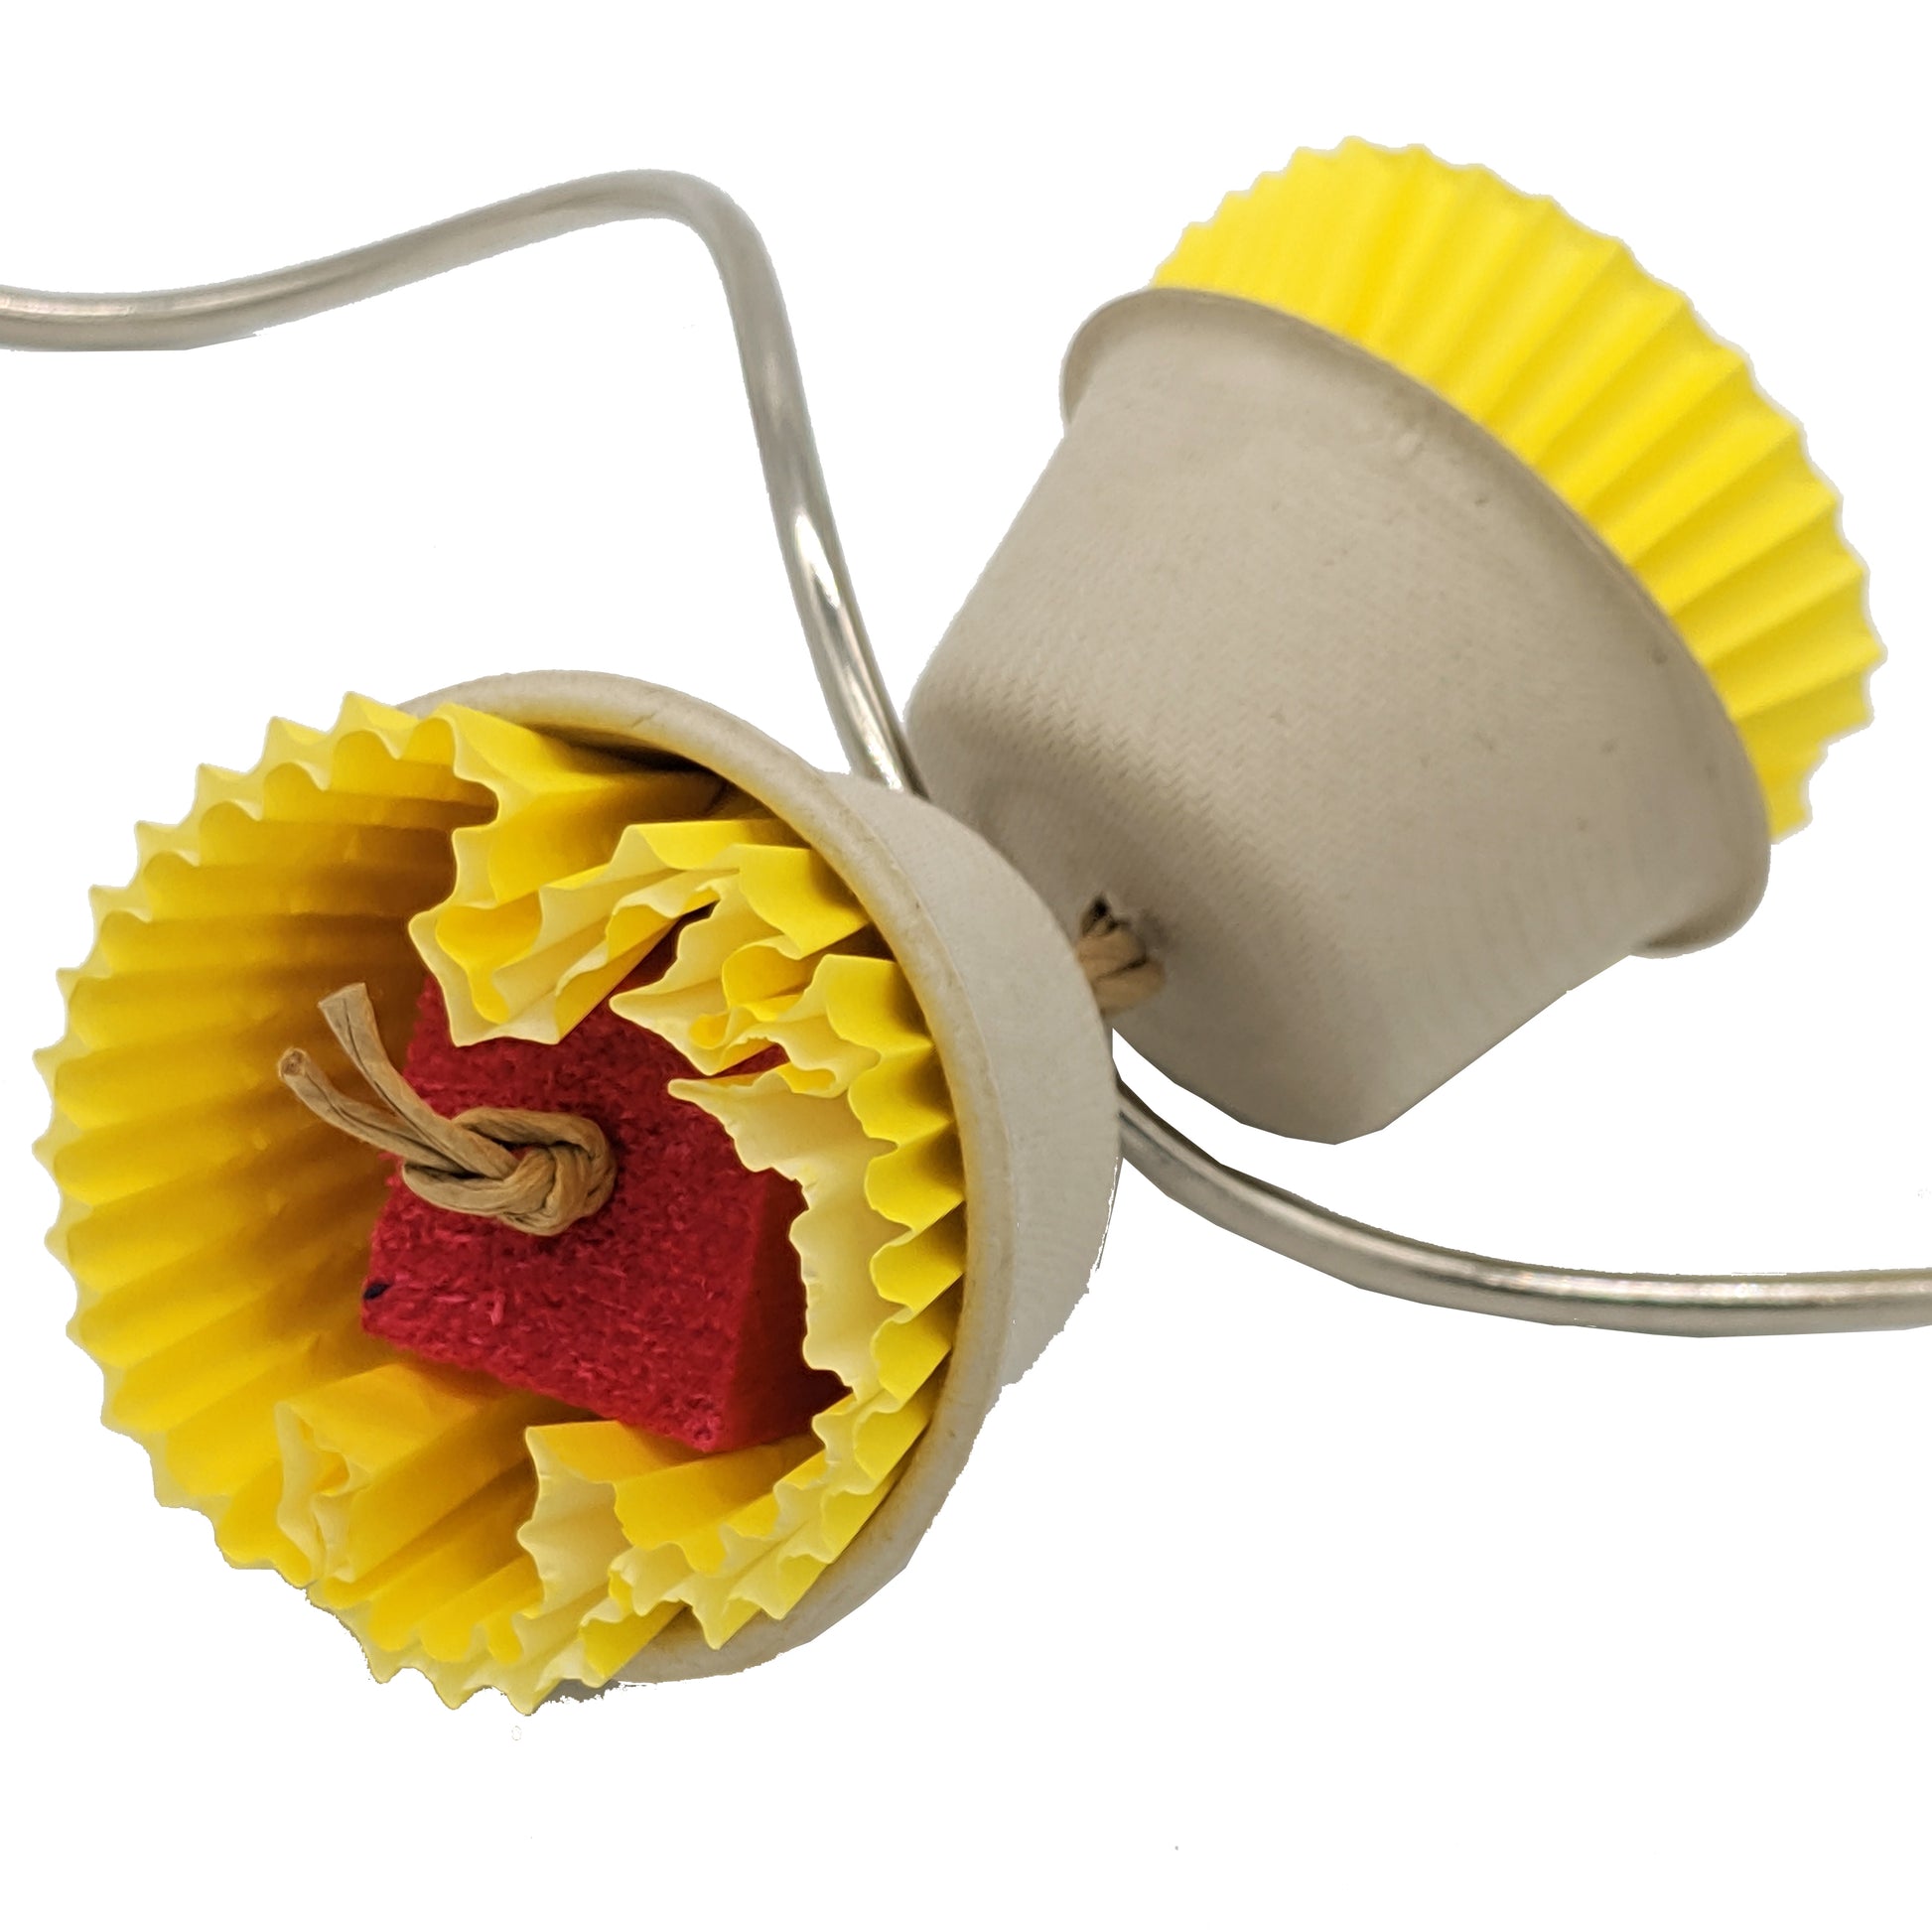 A bird toy shown on a skewer. Consists of plant based fiber cups with cupcake liners and 1 inch balsa blocks tucked inside. 